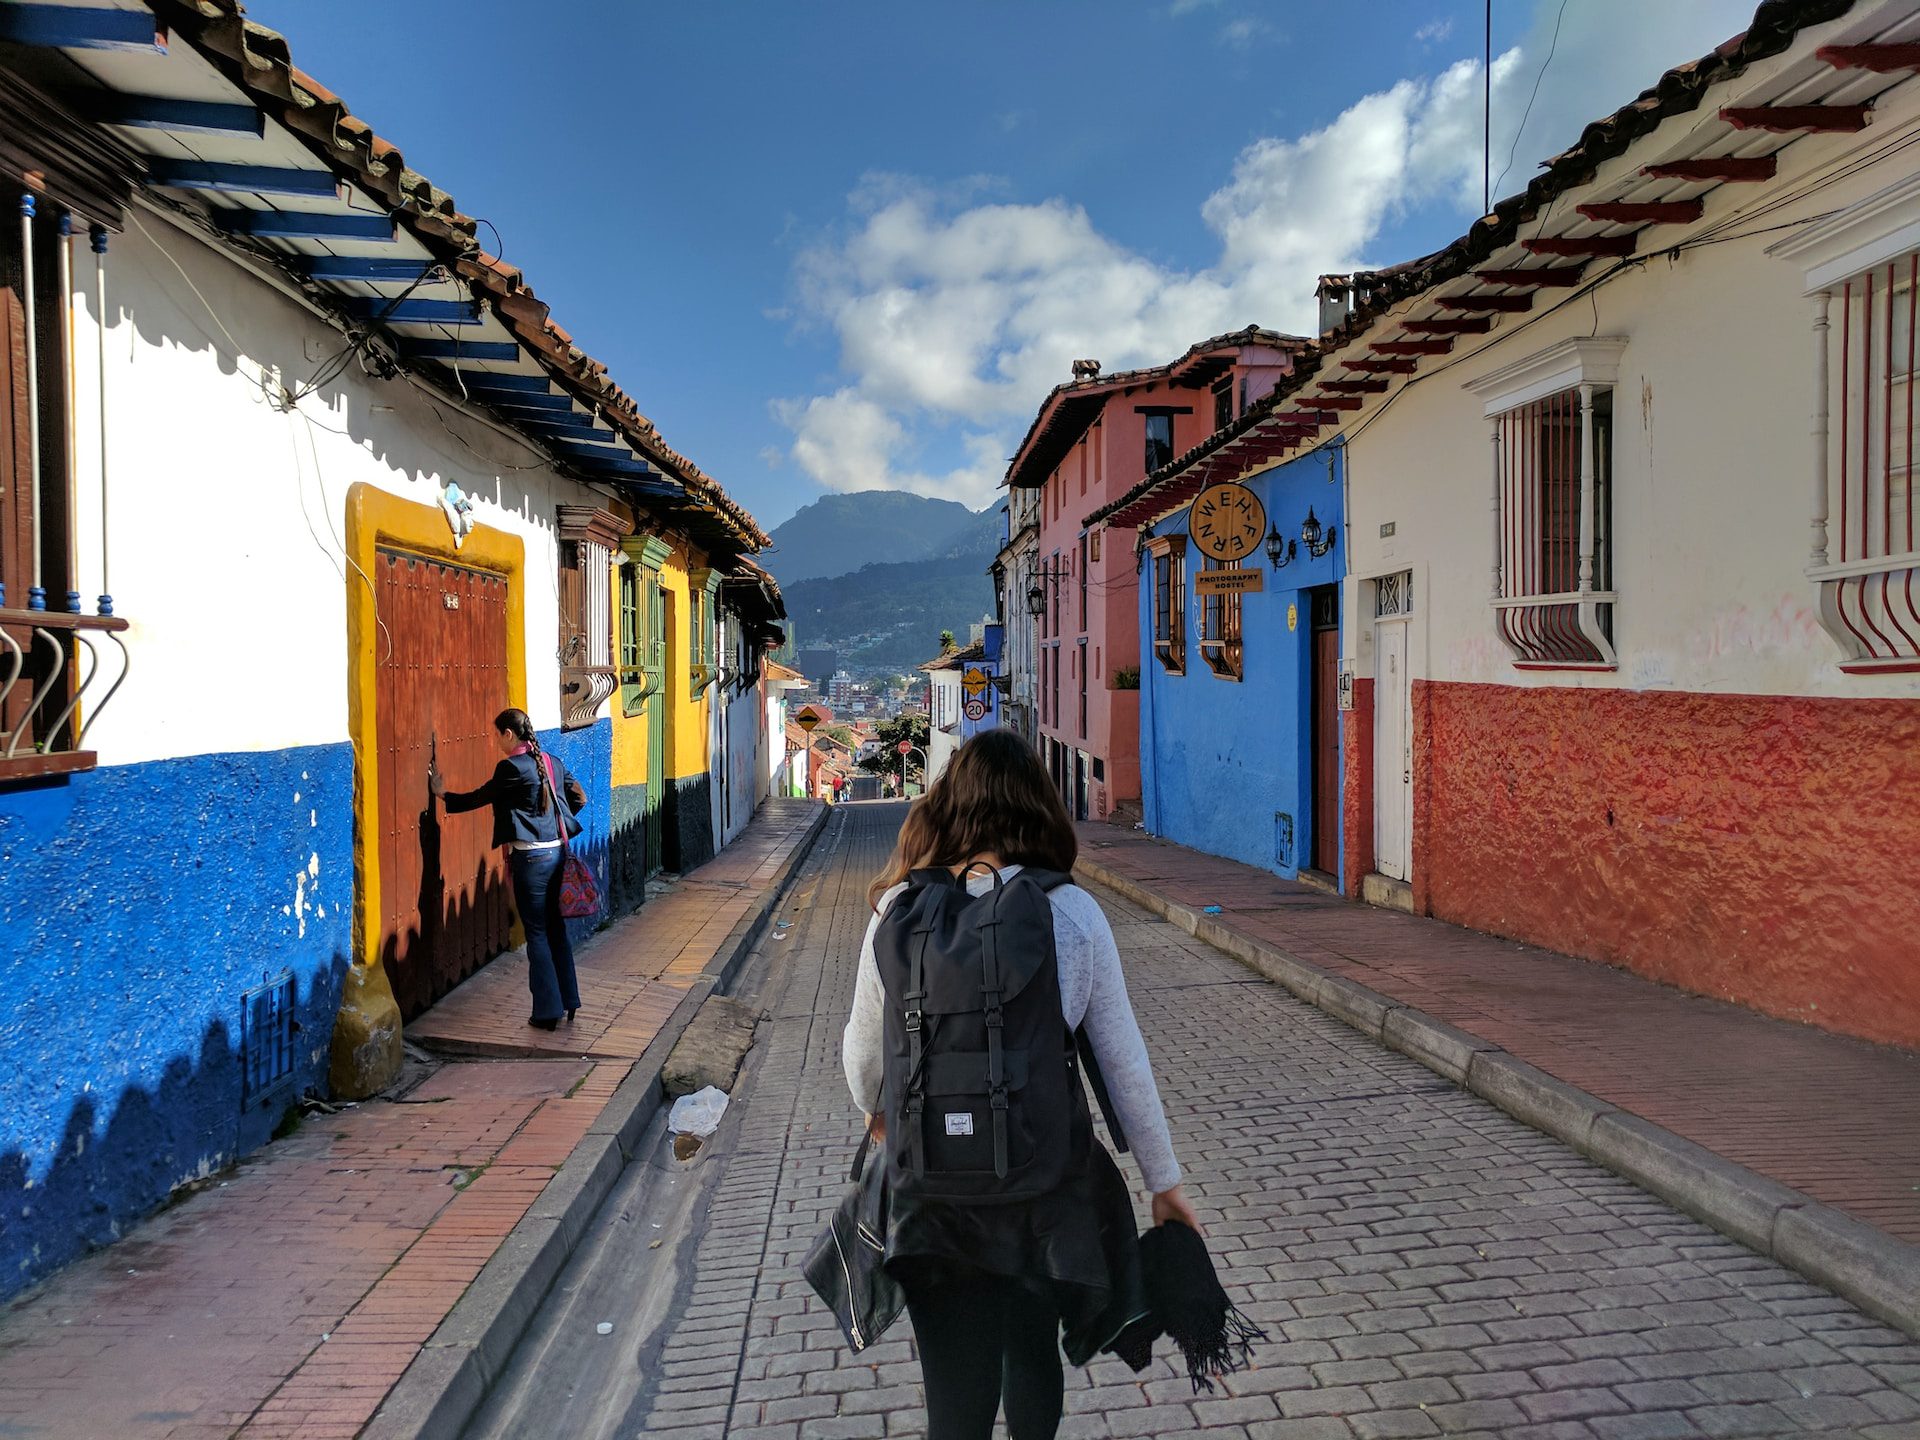 A backpacker walking down a historic street with colourful old buildings on either side.